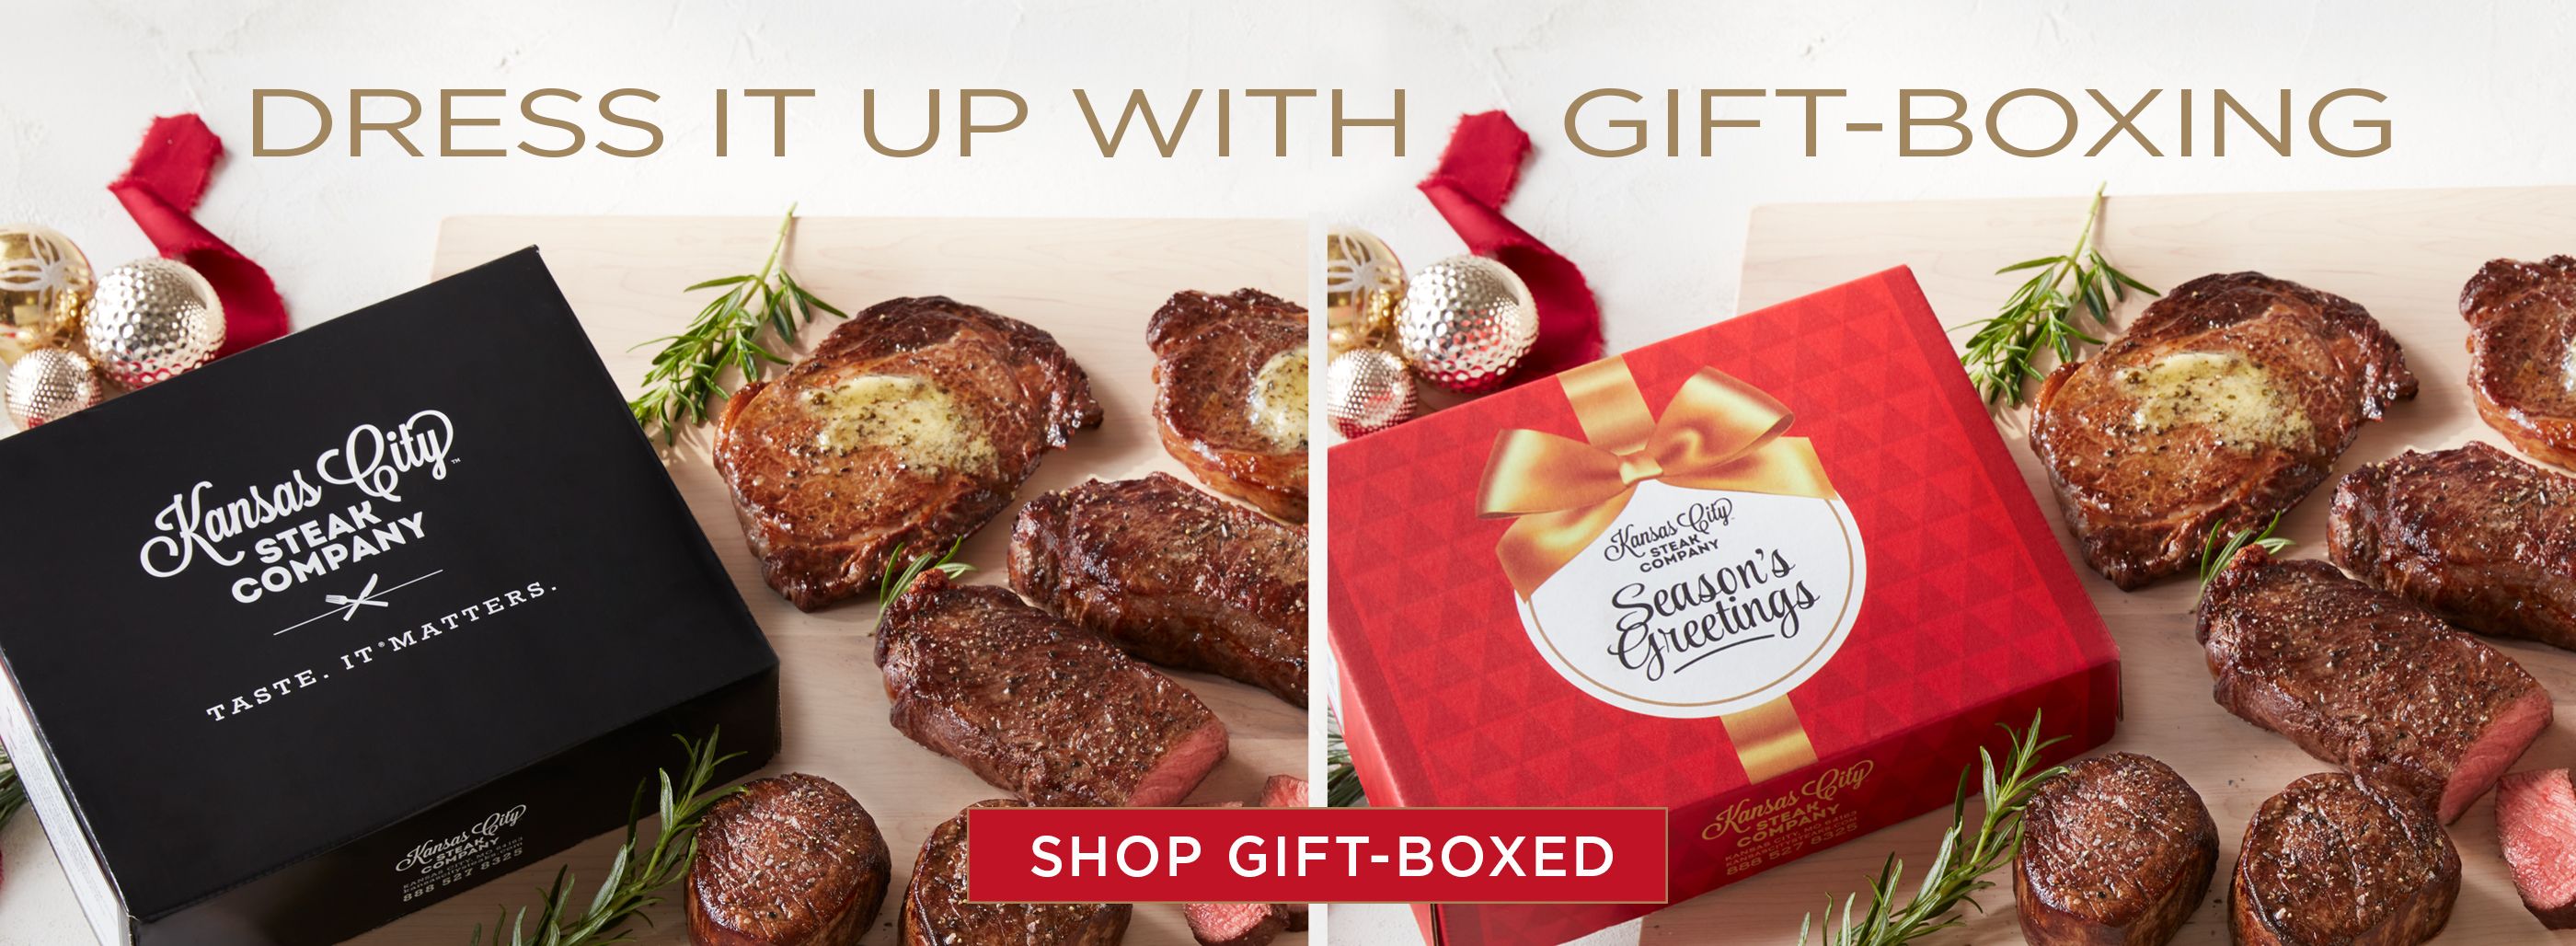 Dress it up with gift-boxing.